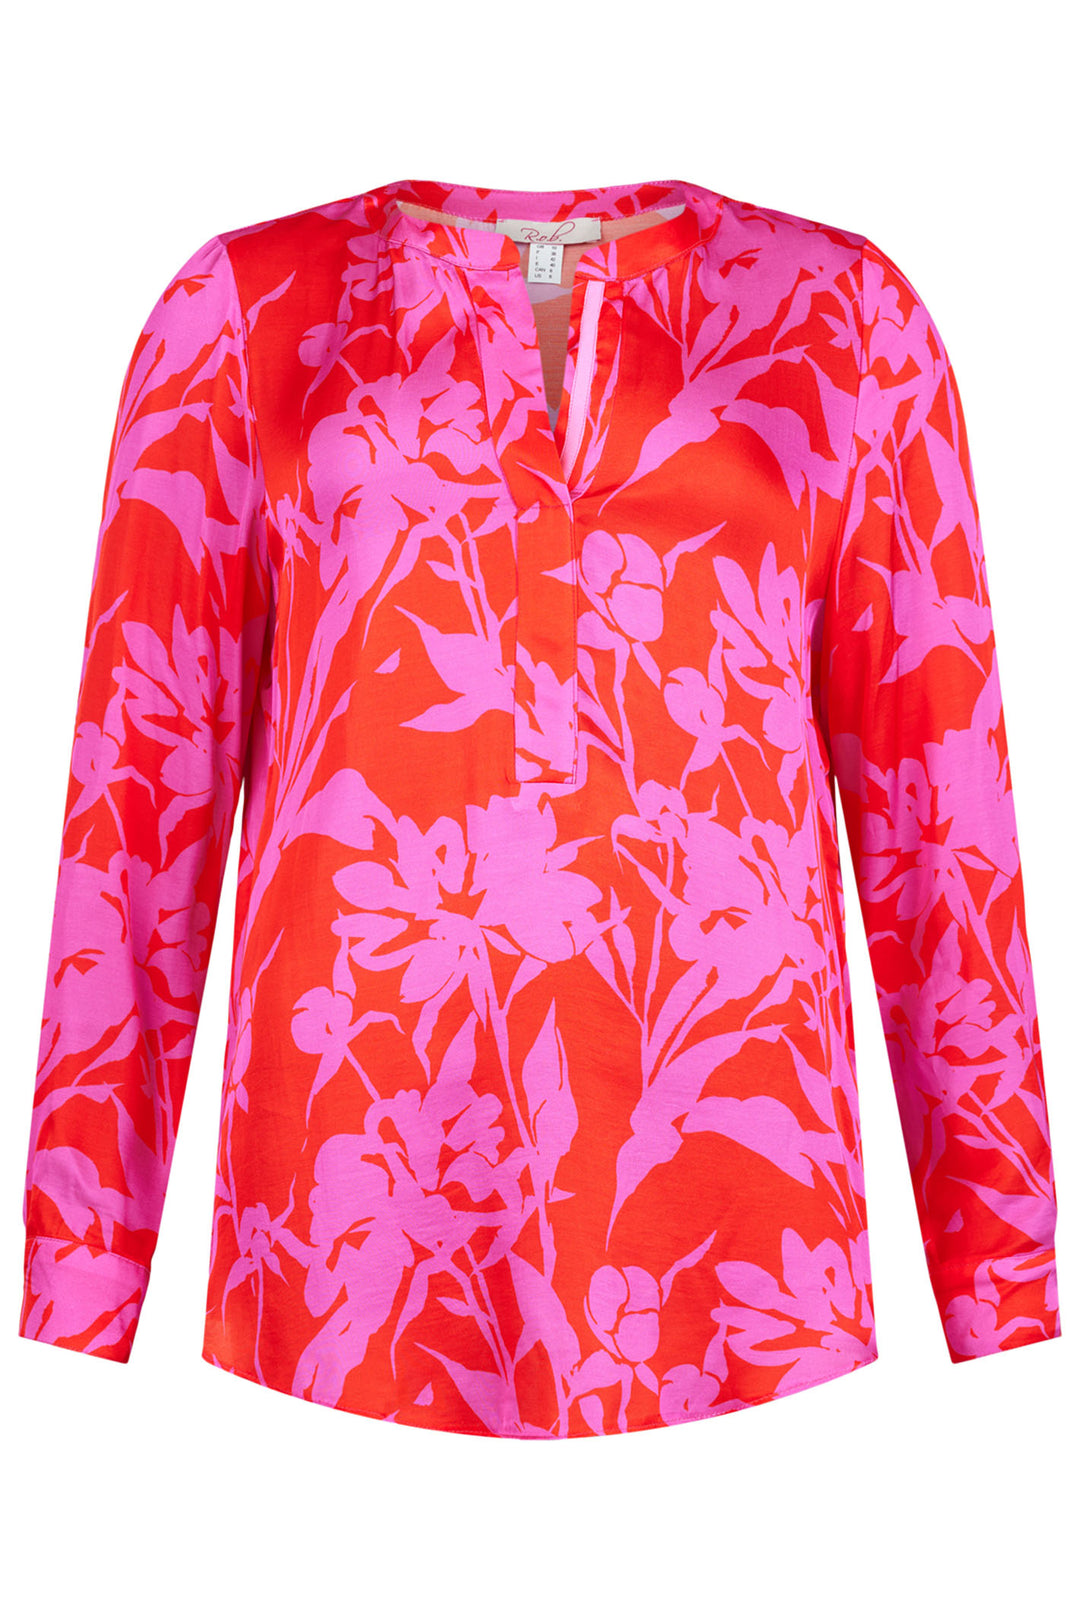 Robell R.O.B 56437 32 Red & Hot Pink Print Hannah Blouse - Experience Boutique